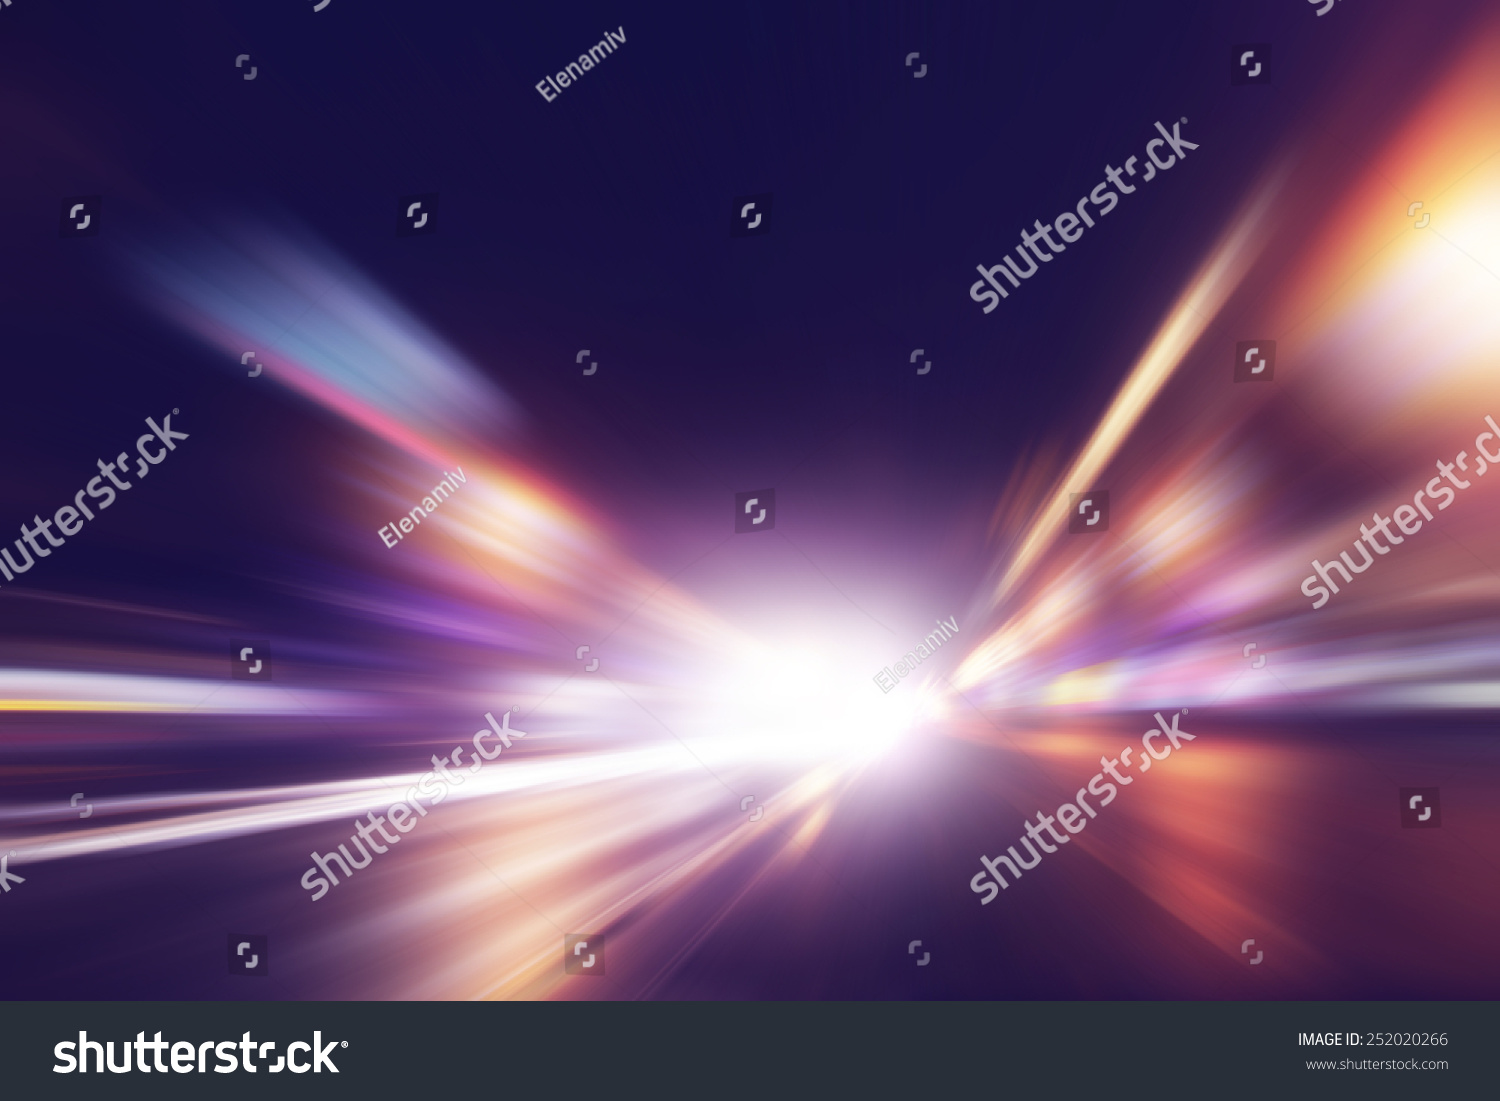 Abstract image of speed motion on the road at night time. #252020266